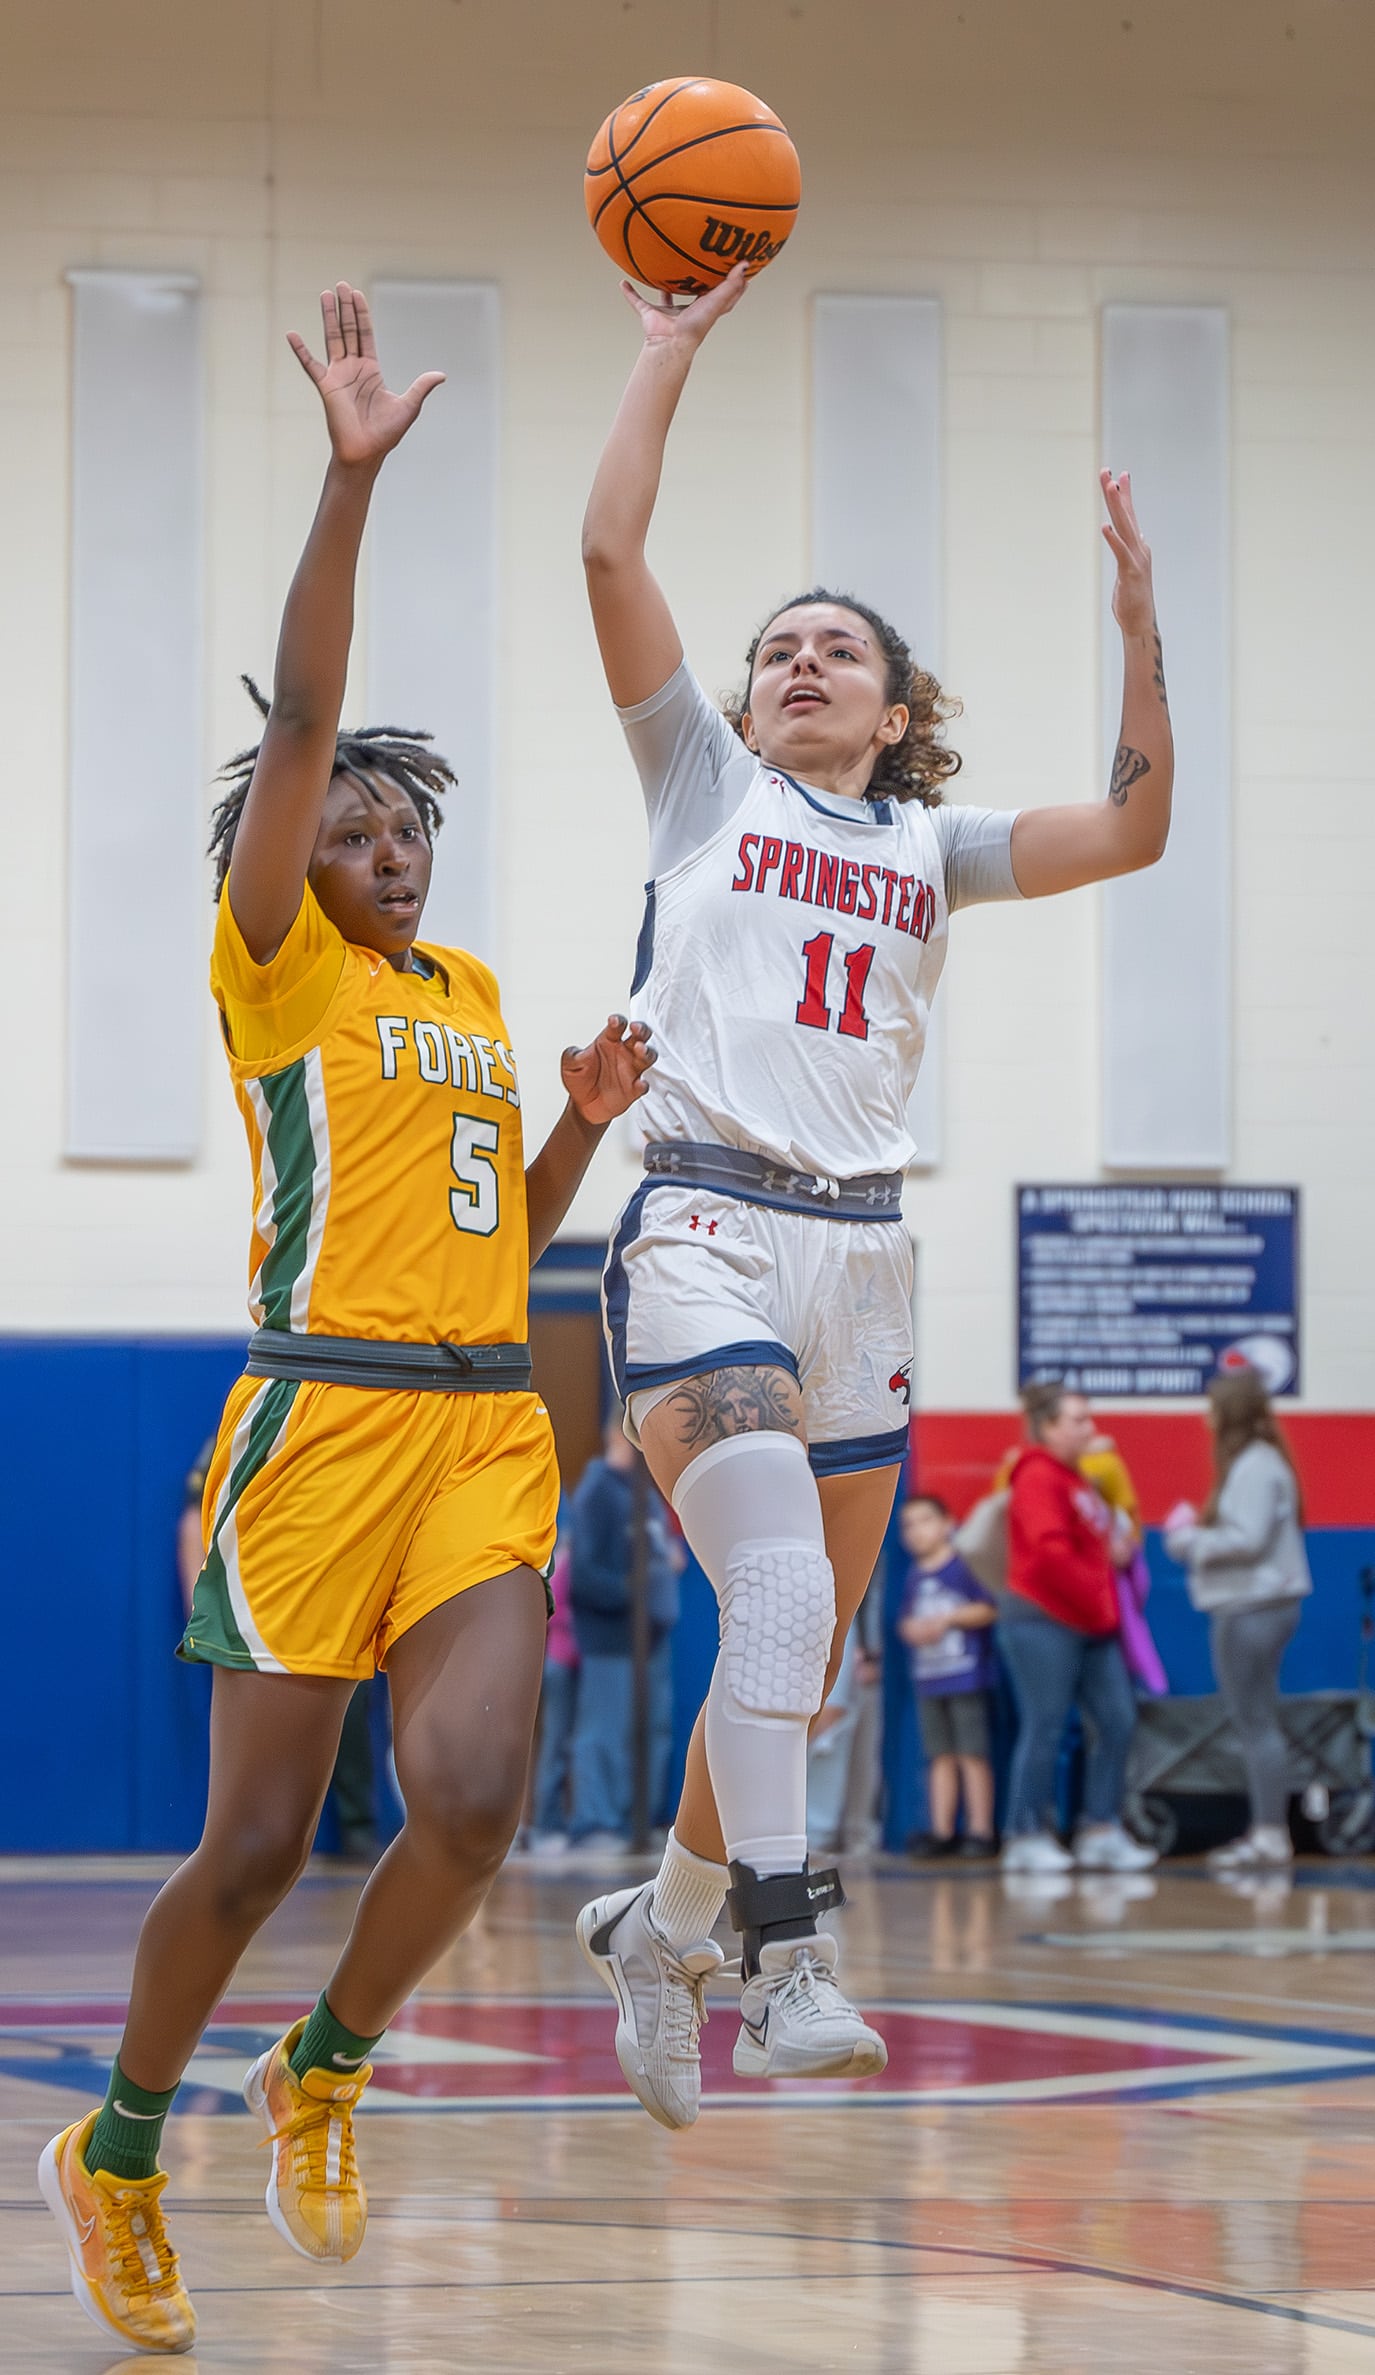 Springstead High School, 11, Samantha Suarez shoots over Forest High defender Janaina Wess ,5, in the 6A Division 4 Championship Game. [Photo by Joe DiCristofalo]